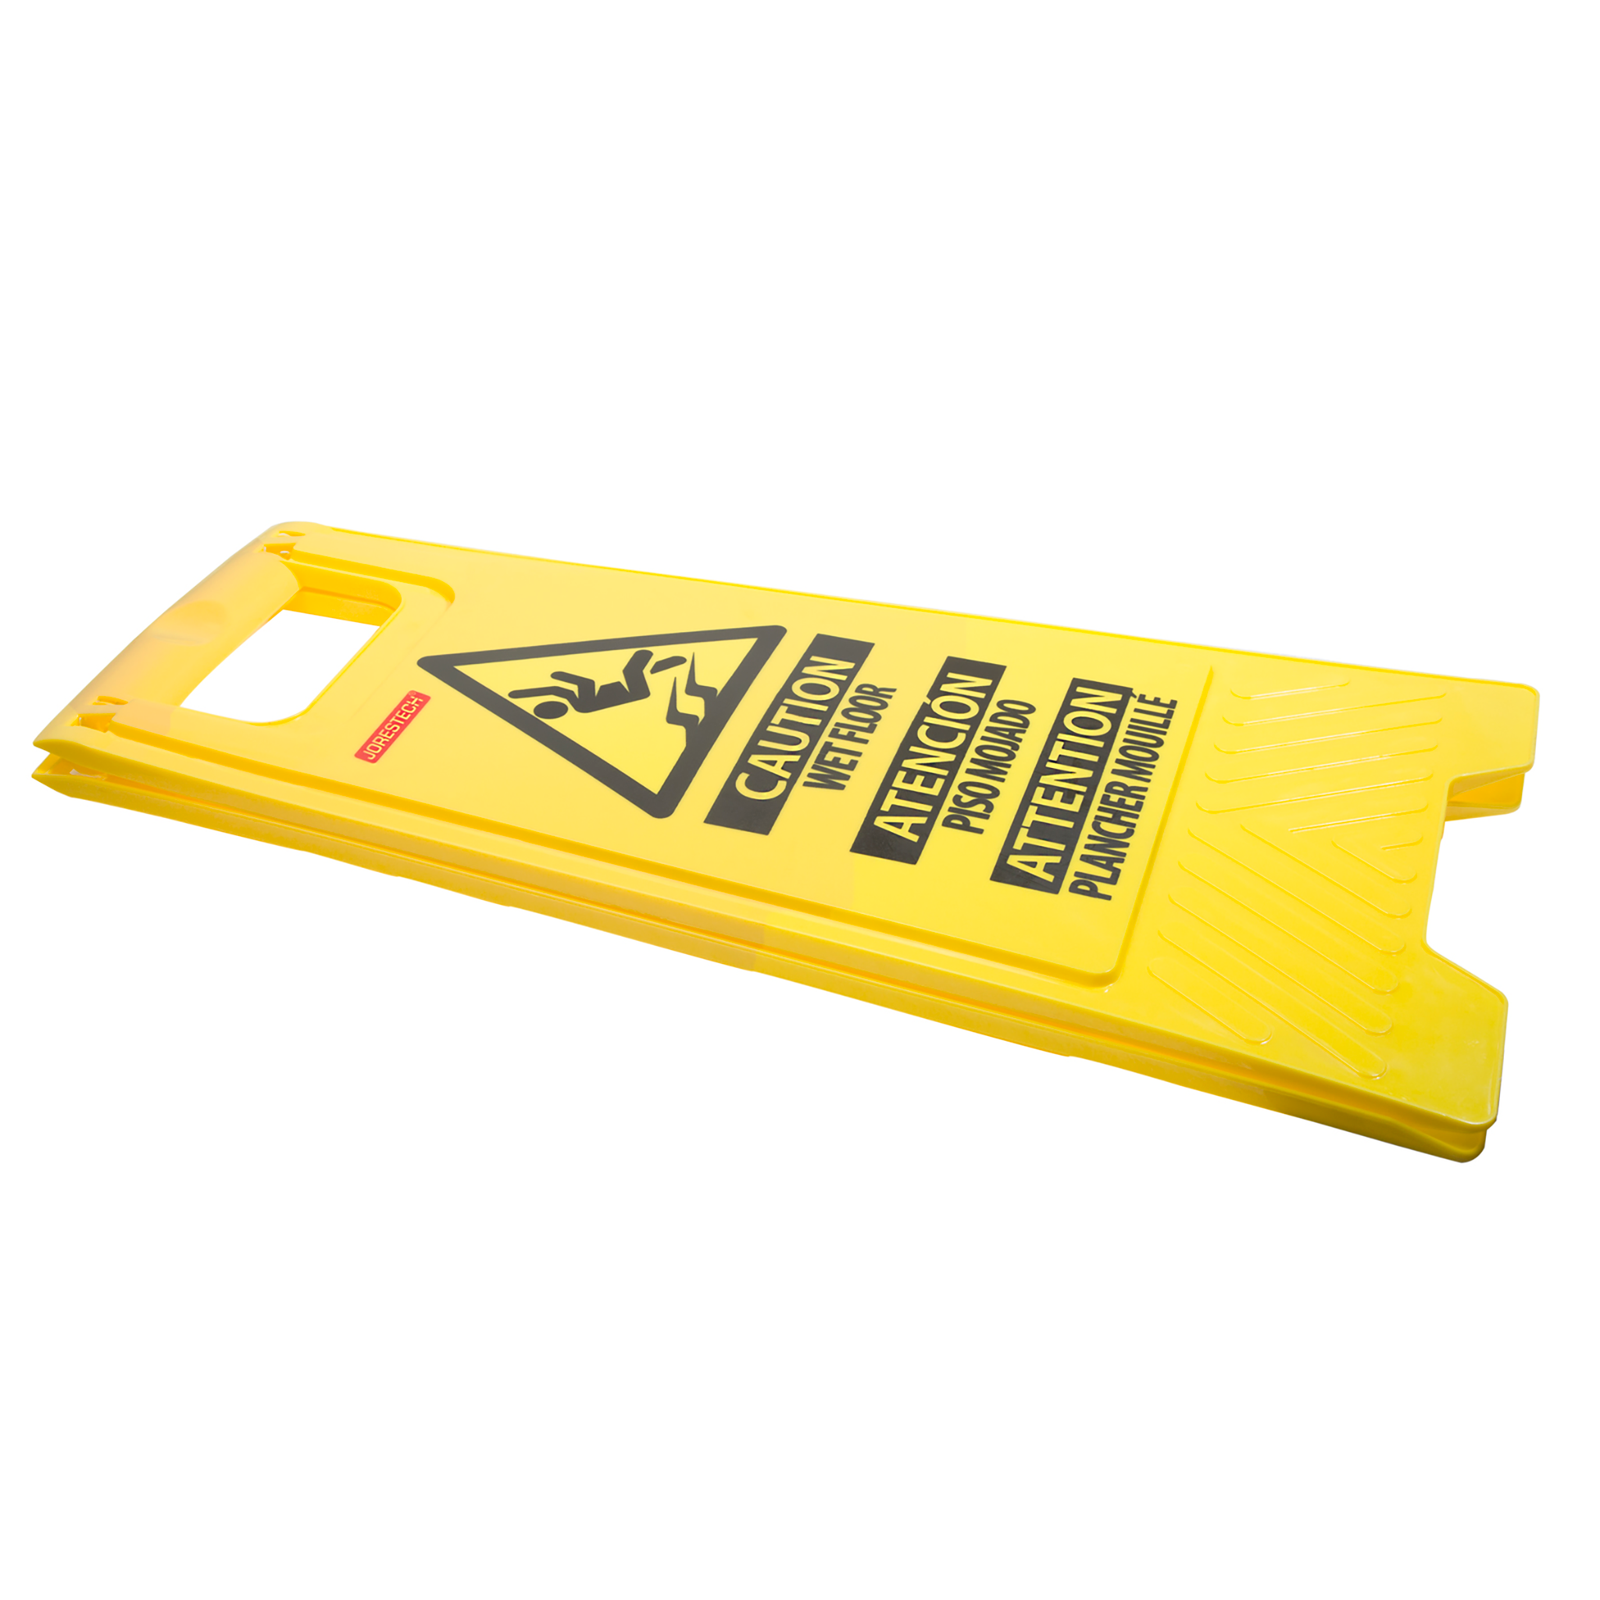 The jorestech two sided folding wet floor caution stand folded for transportation and storage